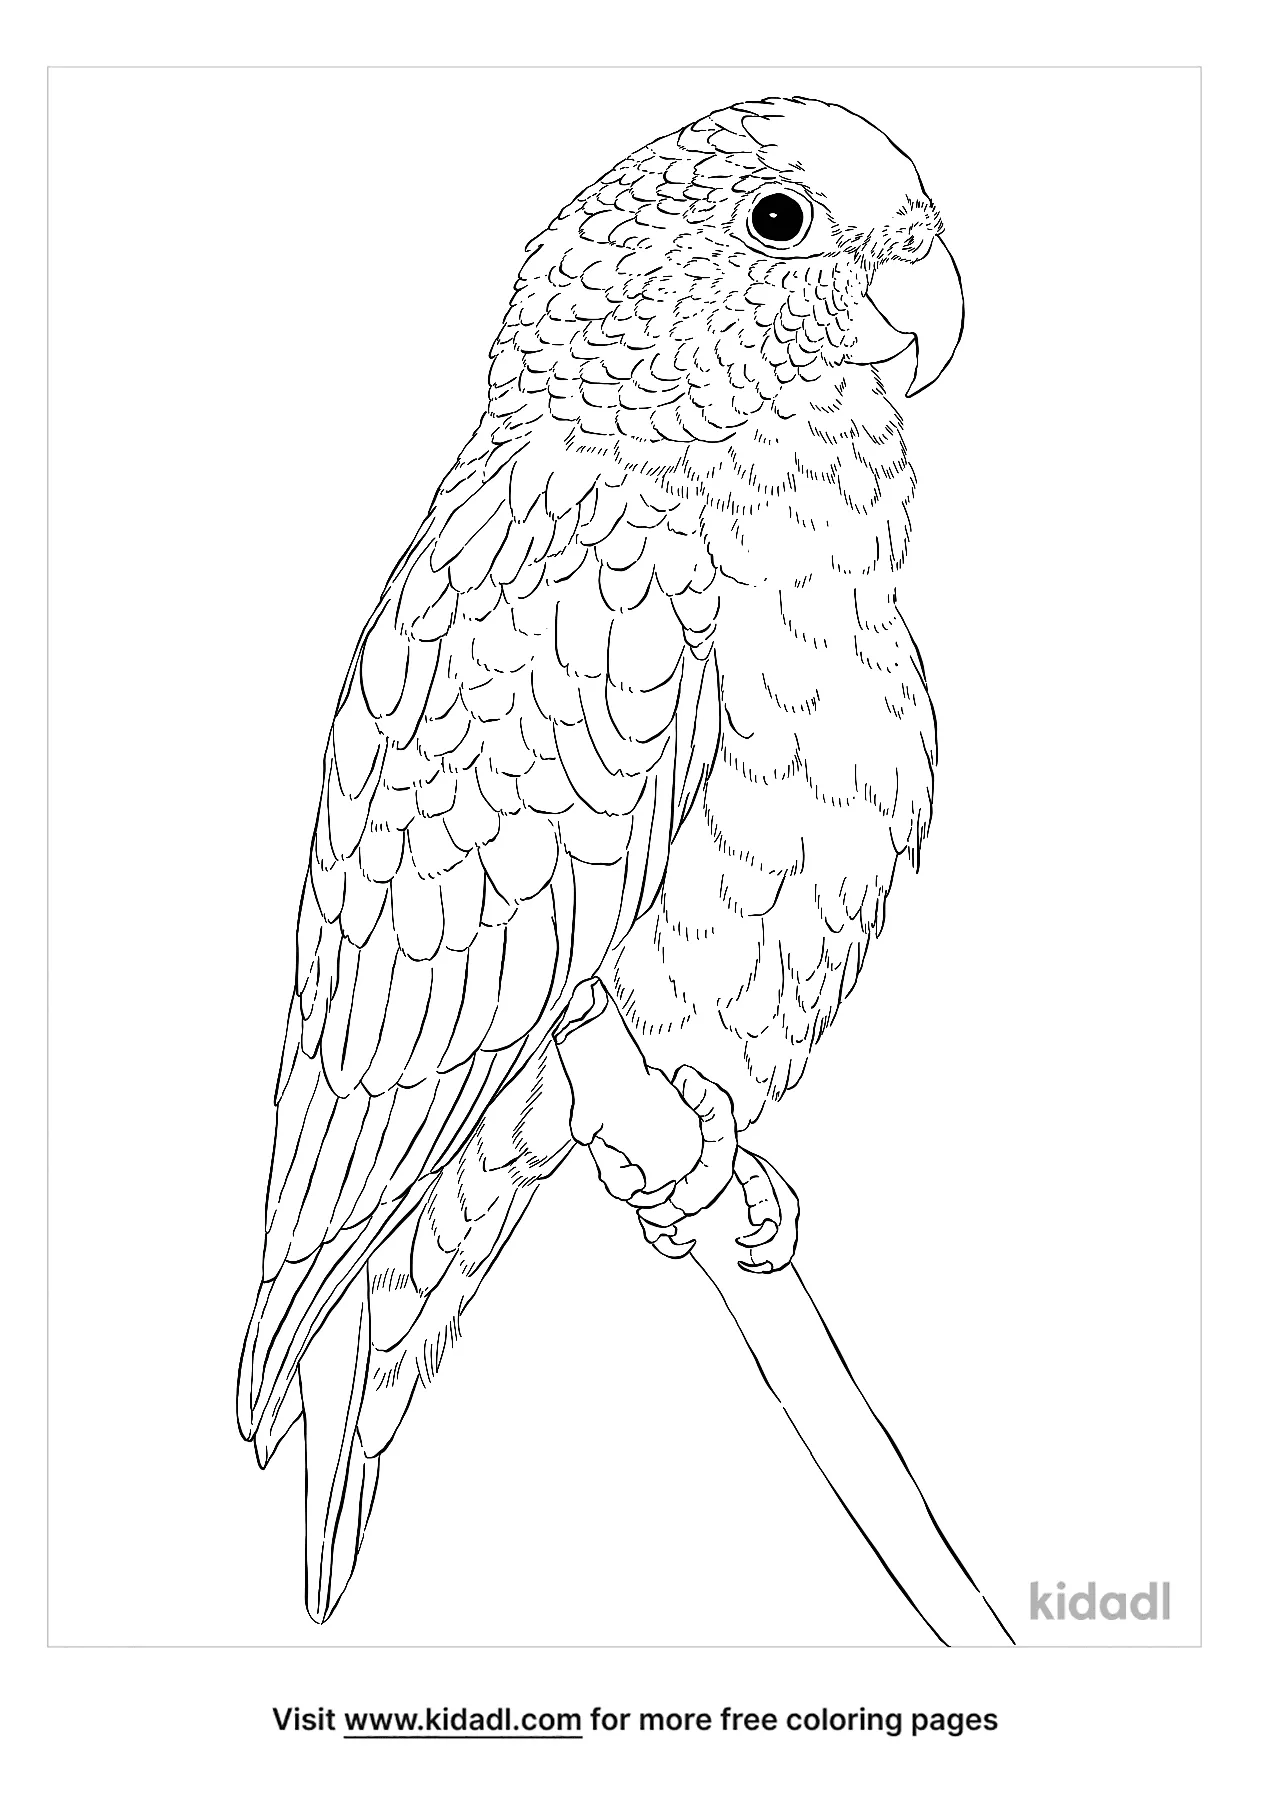 Pionus Parrot Coloring Page | Free Birds Coloring Page | Kidadl